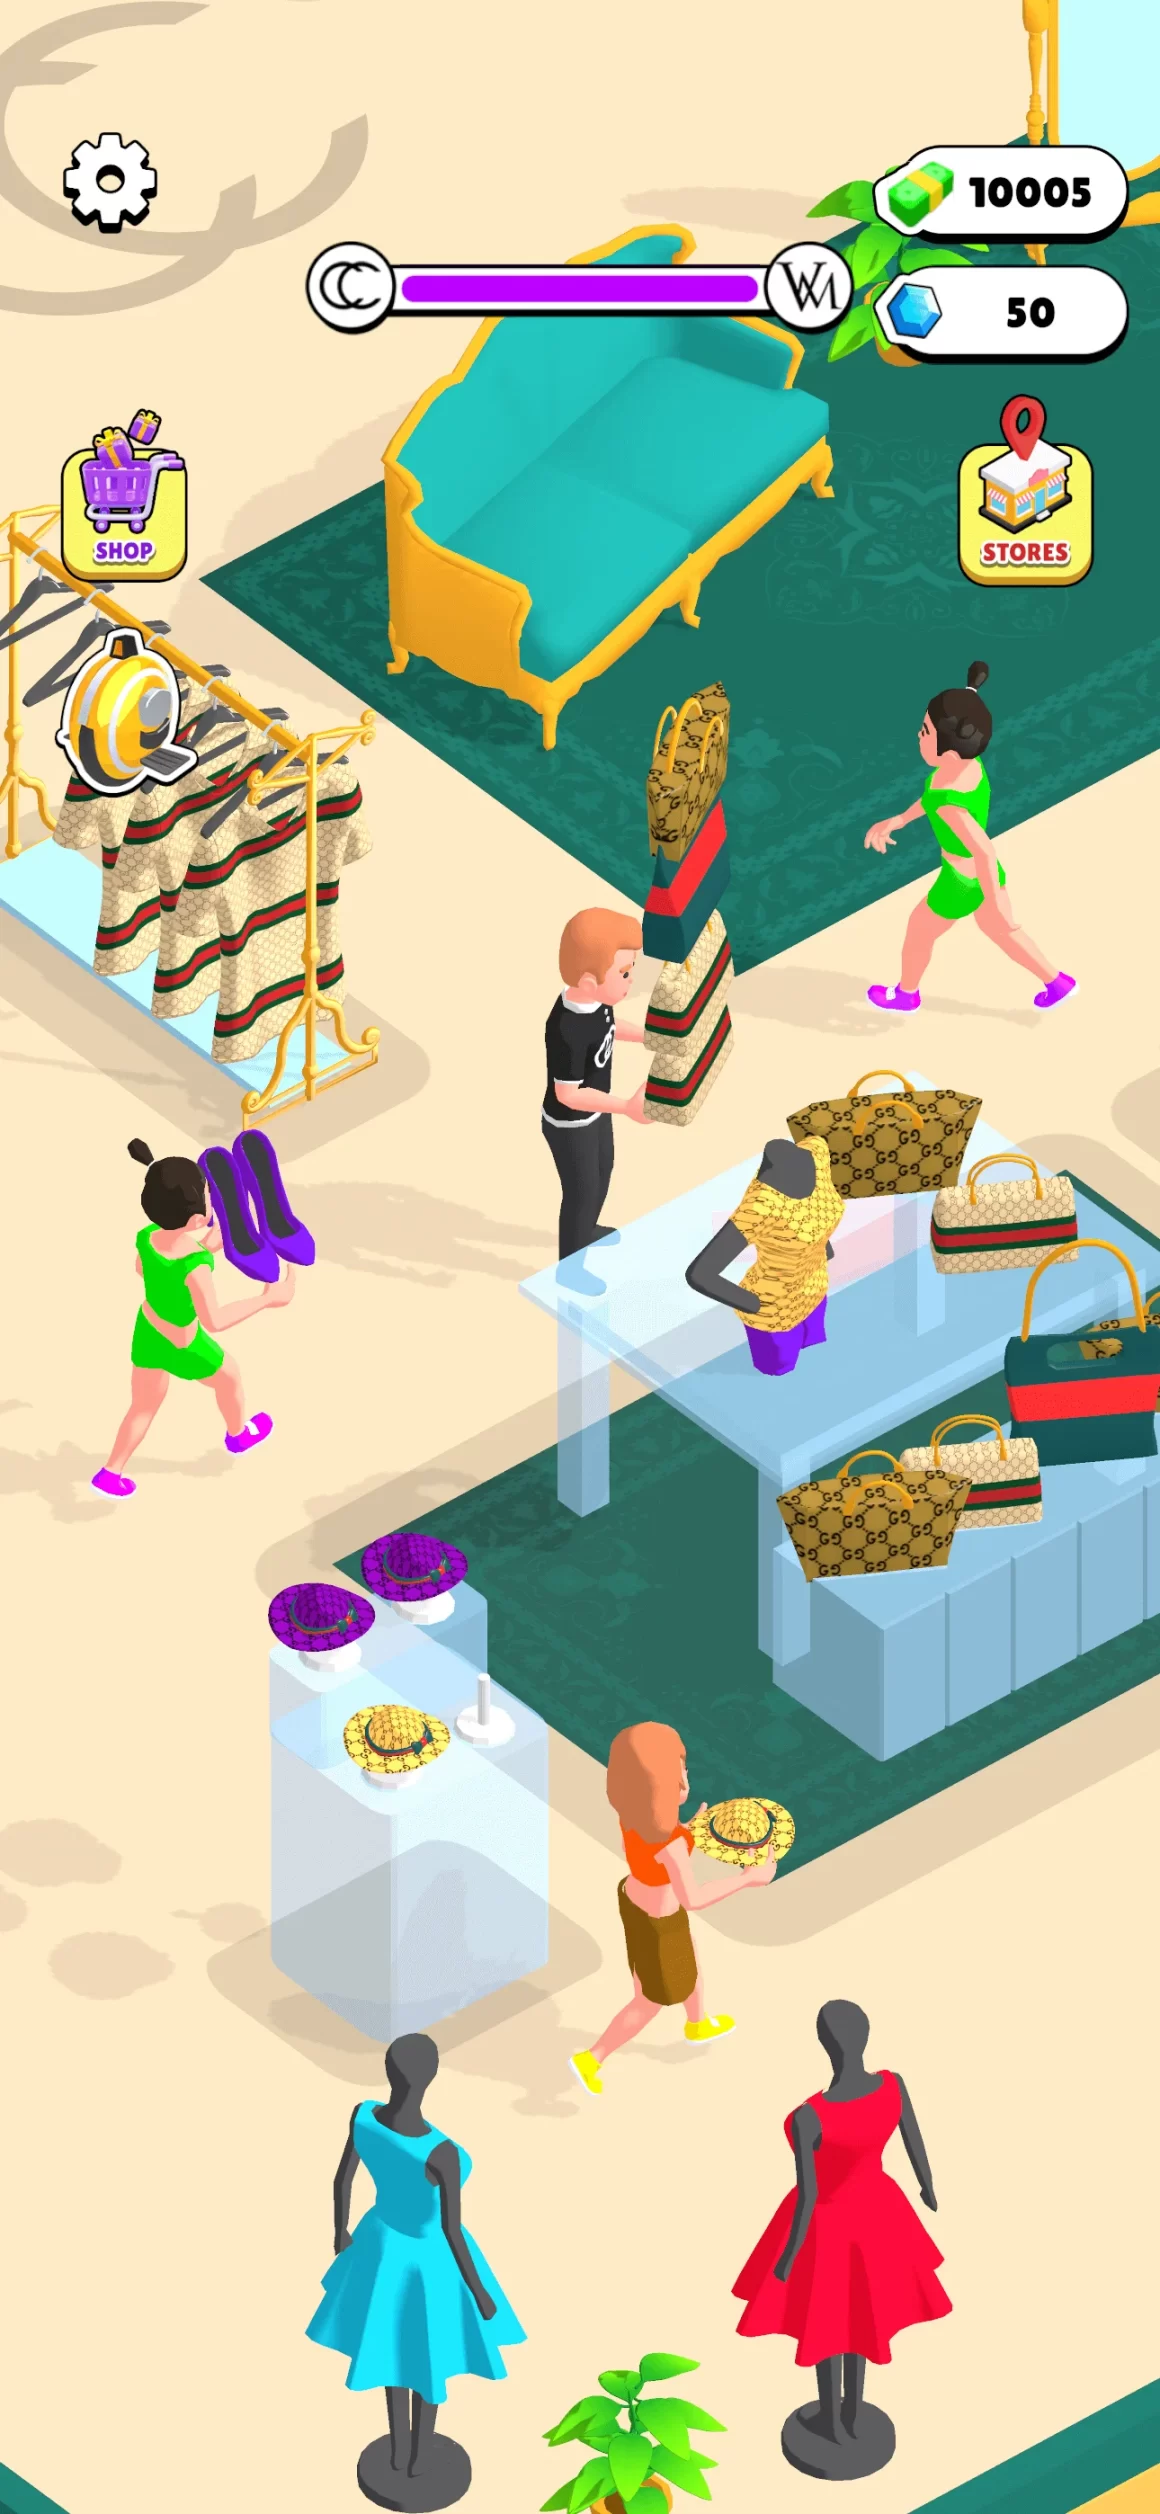 unnamed 23 5 1160x2514 - Outlets Rush Mod Apk V1.31.0 (Unlimited Money) Free Purchase